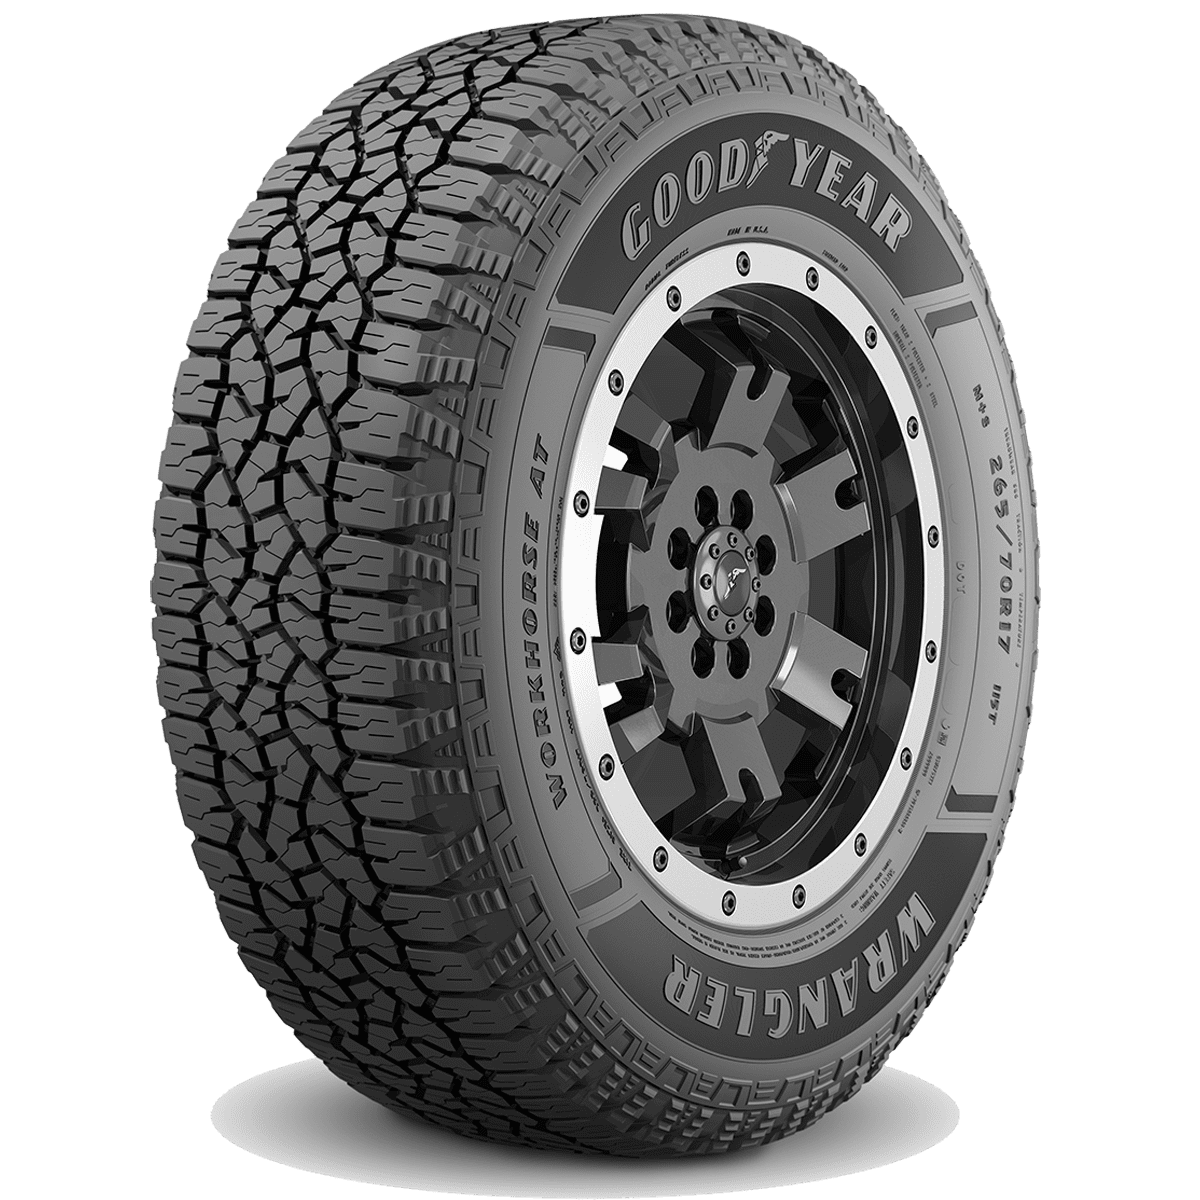 Goodyear Wrangler Workhorse AT 265/70-17 115 T Tire 